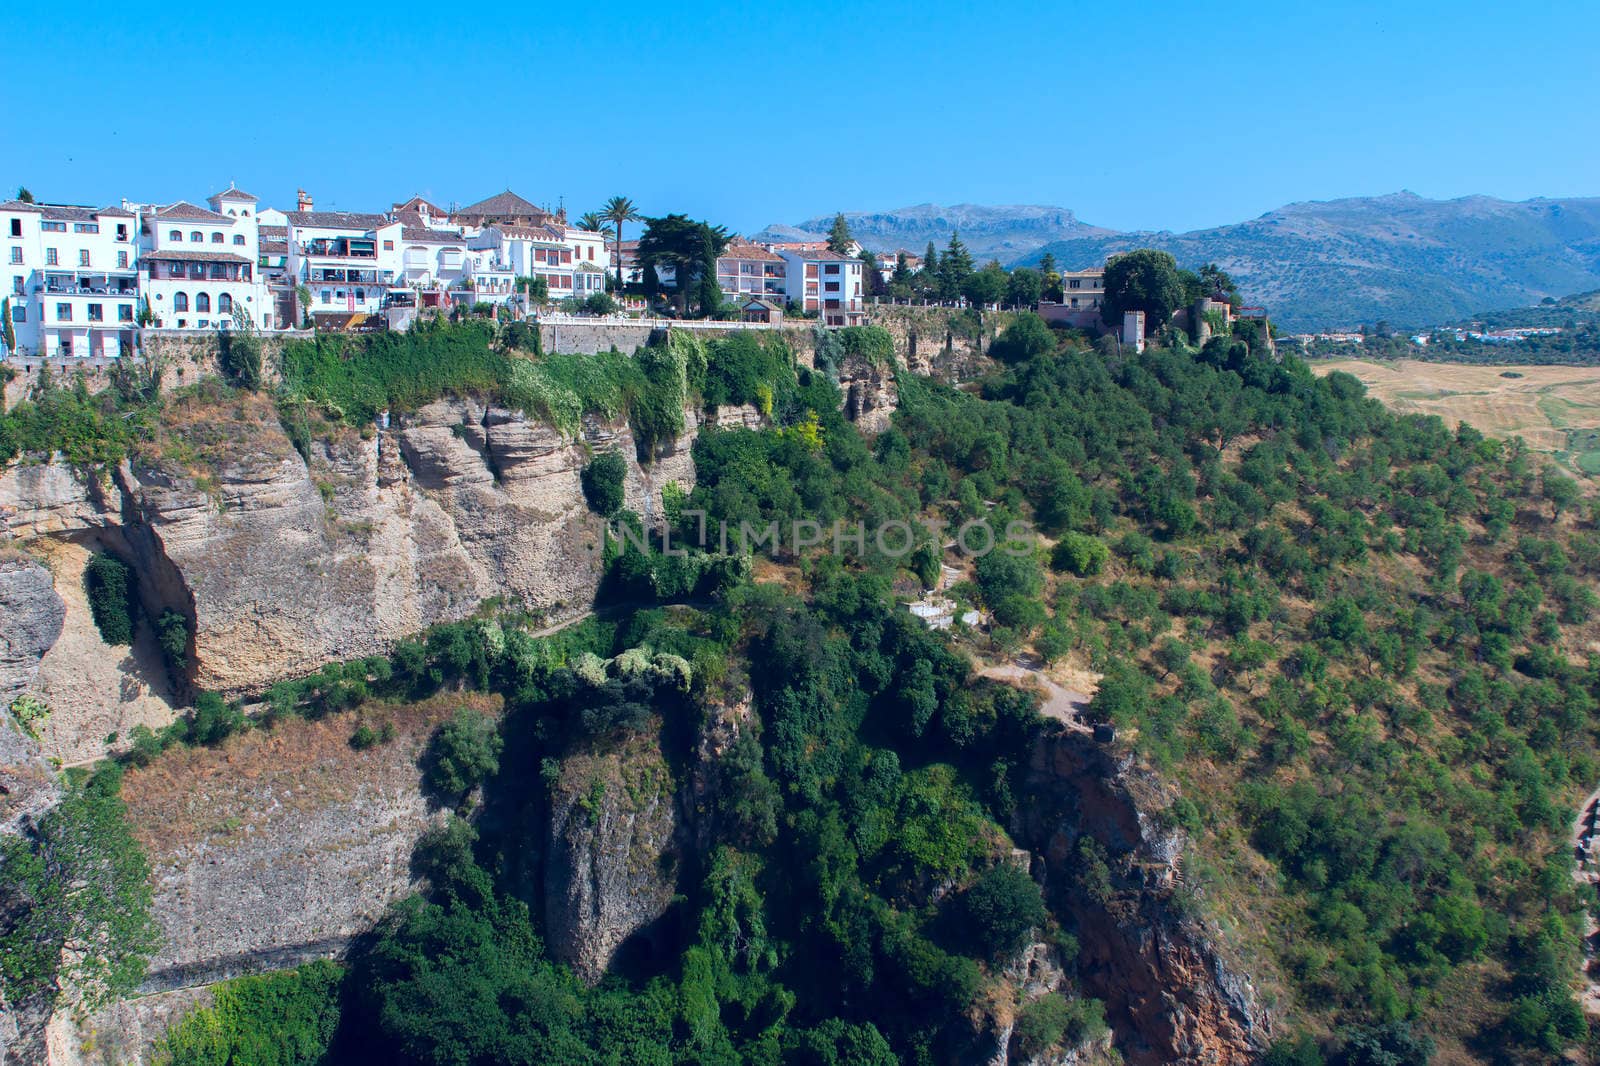 Landscape of the Spanish city of Ronda by BIG_TAU